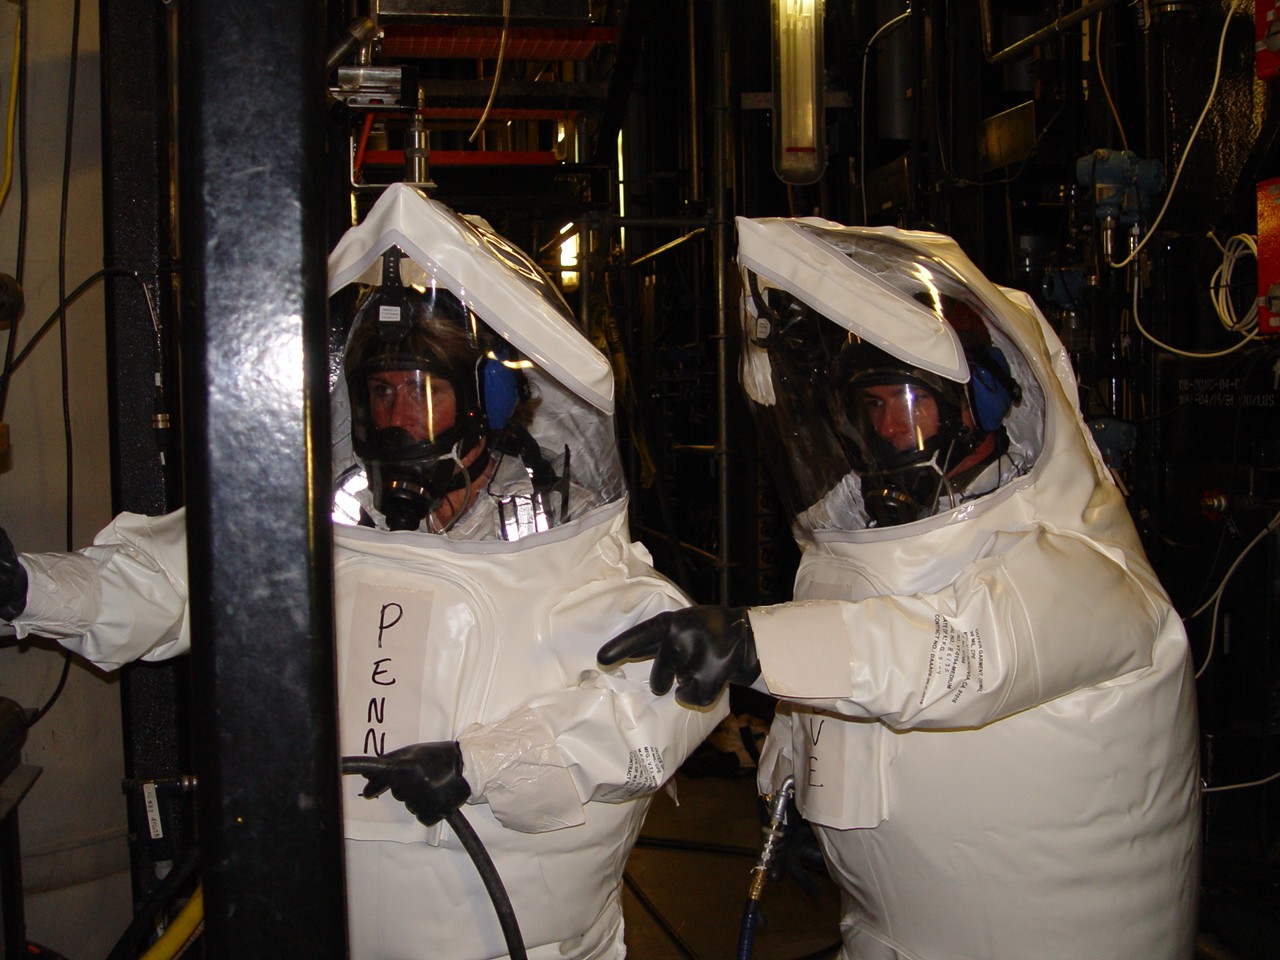 https://upload.wikimedia.org/wikipedia/commons/a/a5/Performing_maintenance_work_in_DPE_suits_at_NECDF.jpg